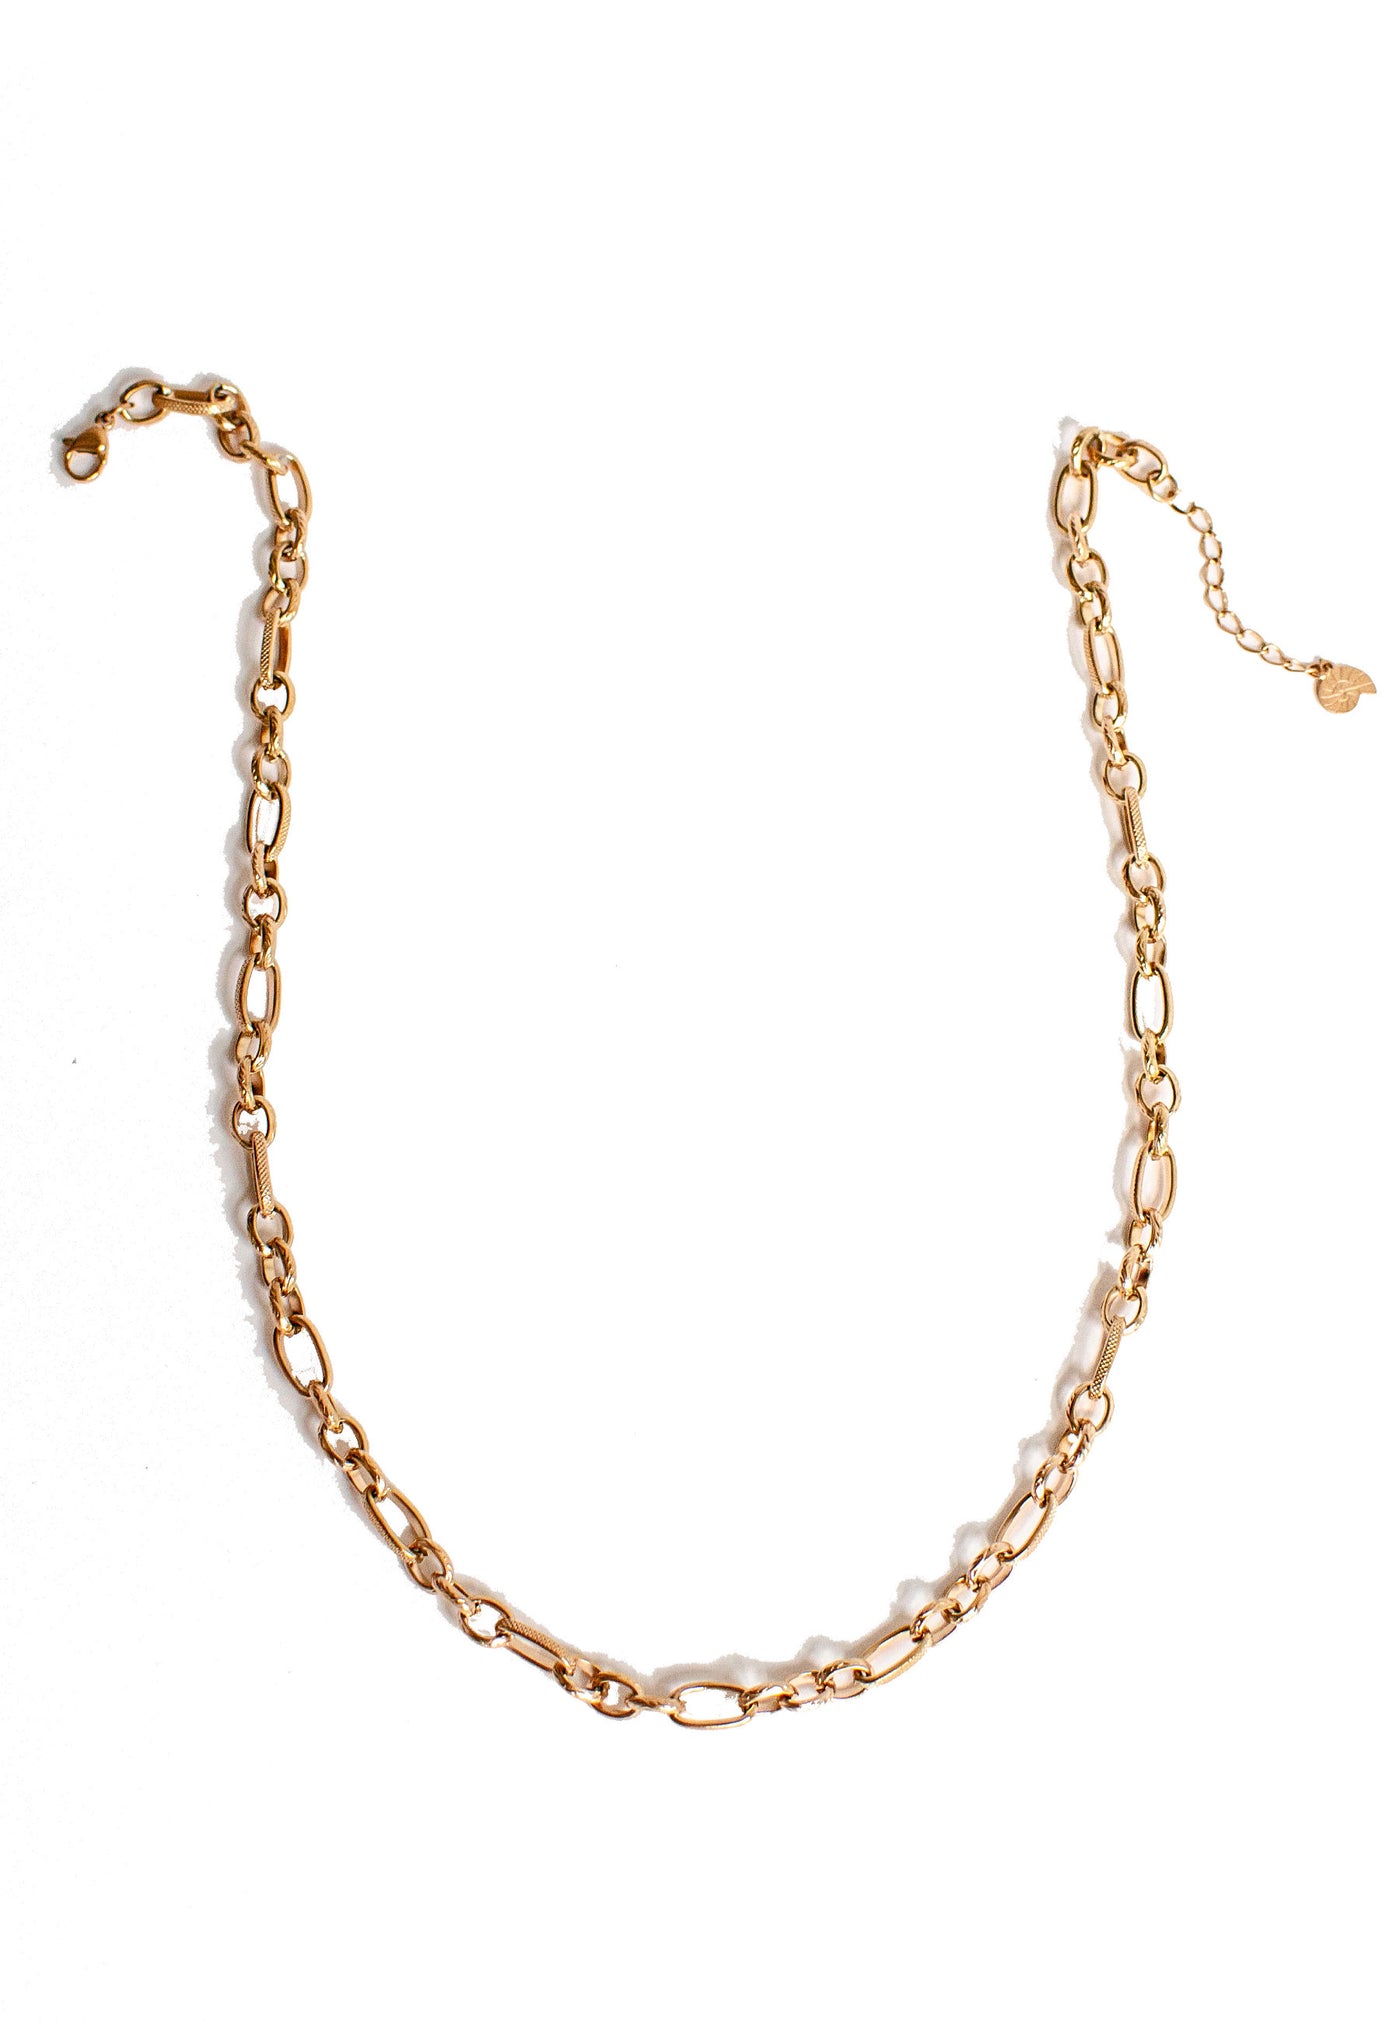 Contemporary Oval Chunky Chain Link Necklace in Rose Gold at